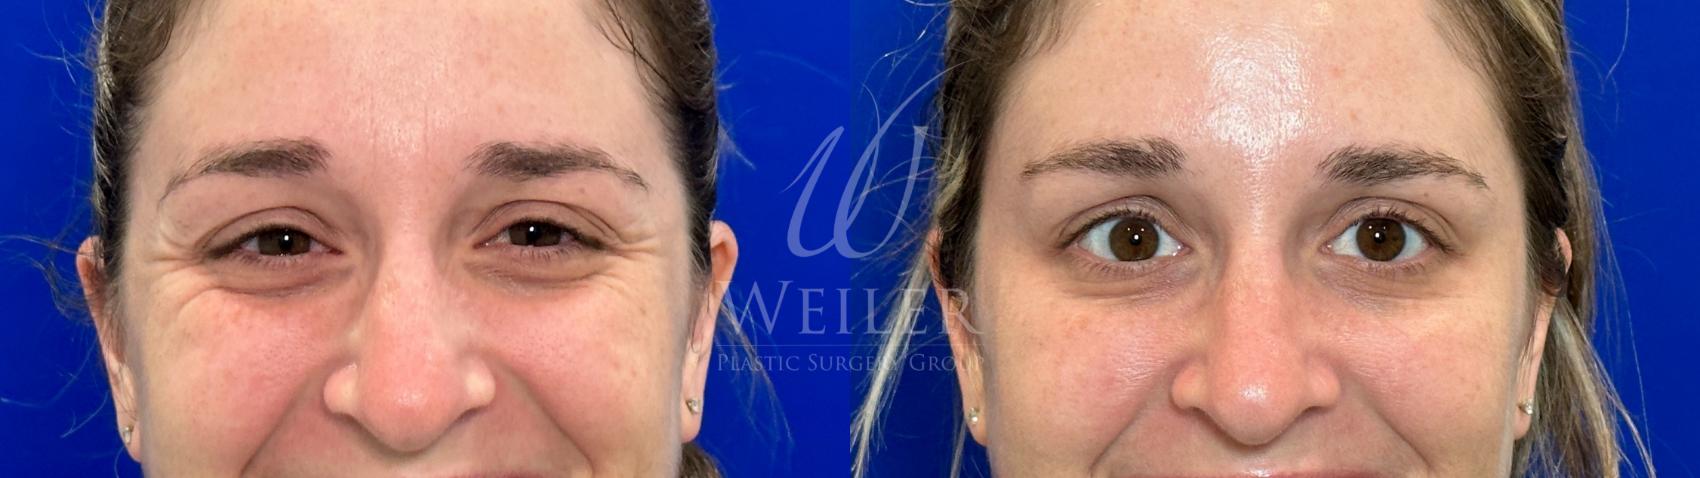 Before & After BOTOX® Cosmetic Case 1180 Front View in Baton Rouge, New Orleans, & Lafayette, Louisiana